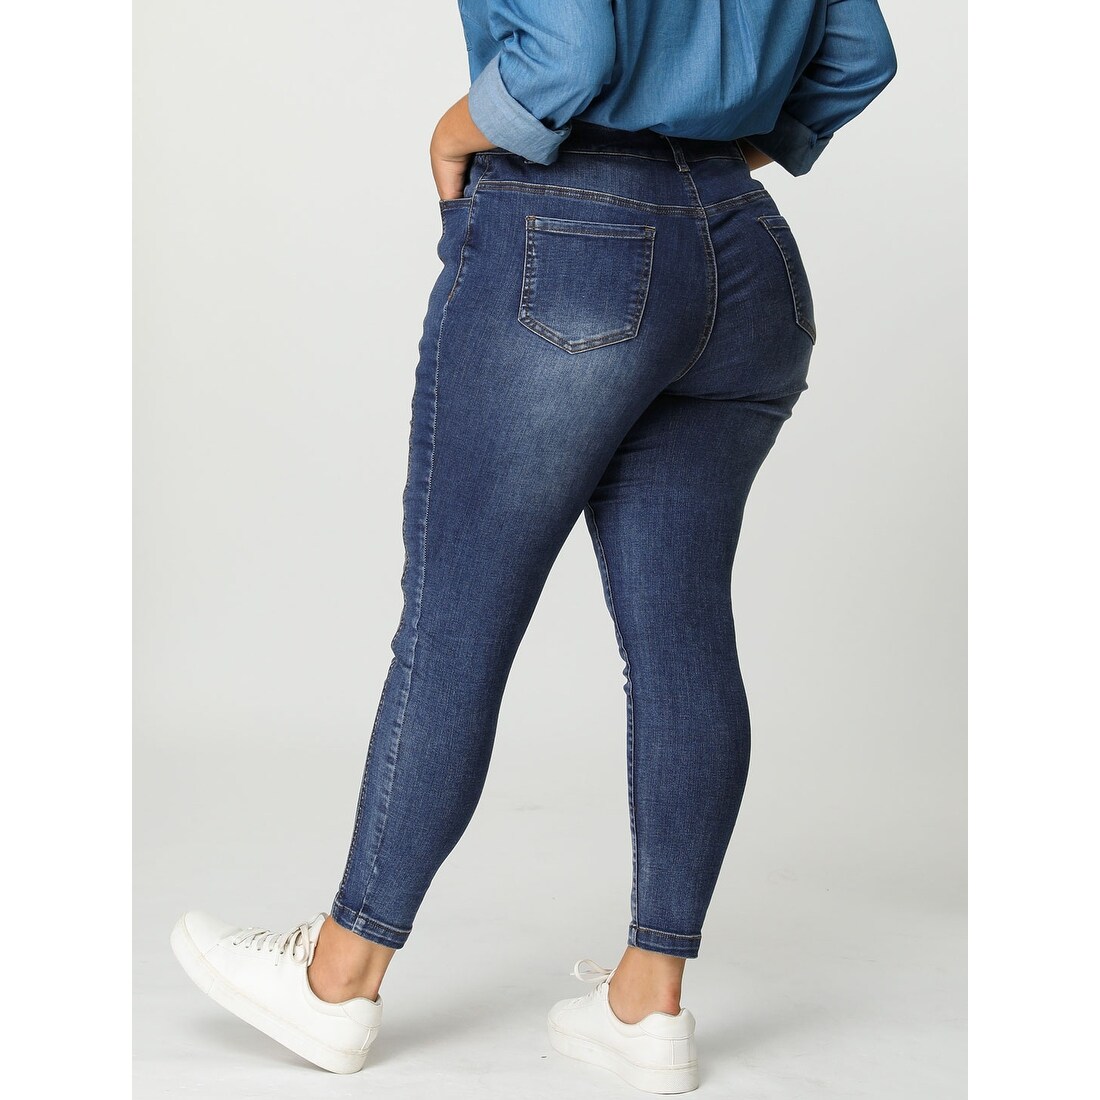 Women's Plus Size Rise Stretch Skinny Jeans Overstock - 28338246